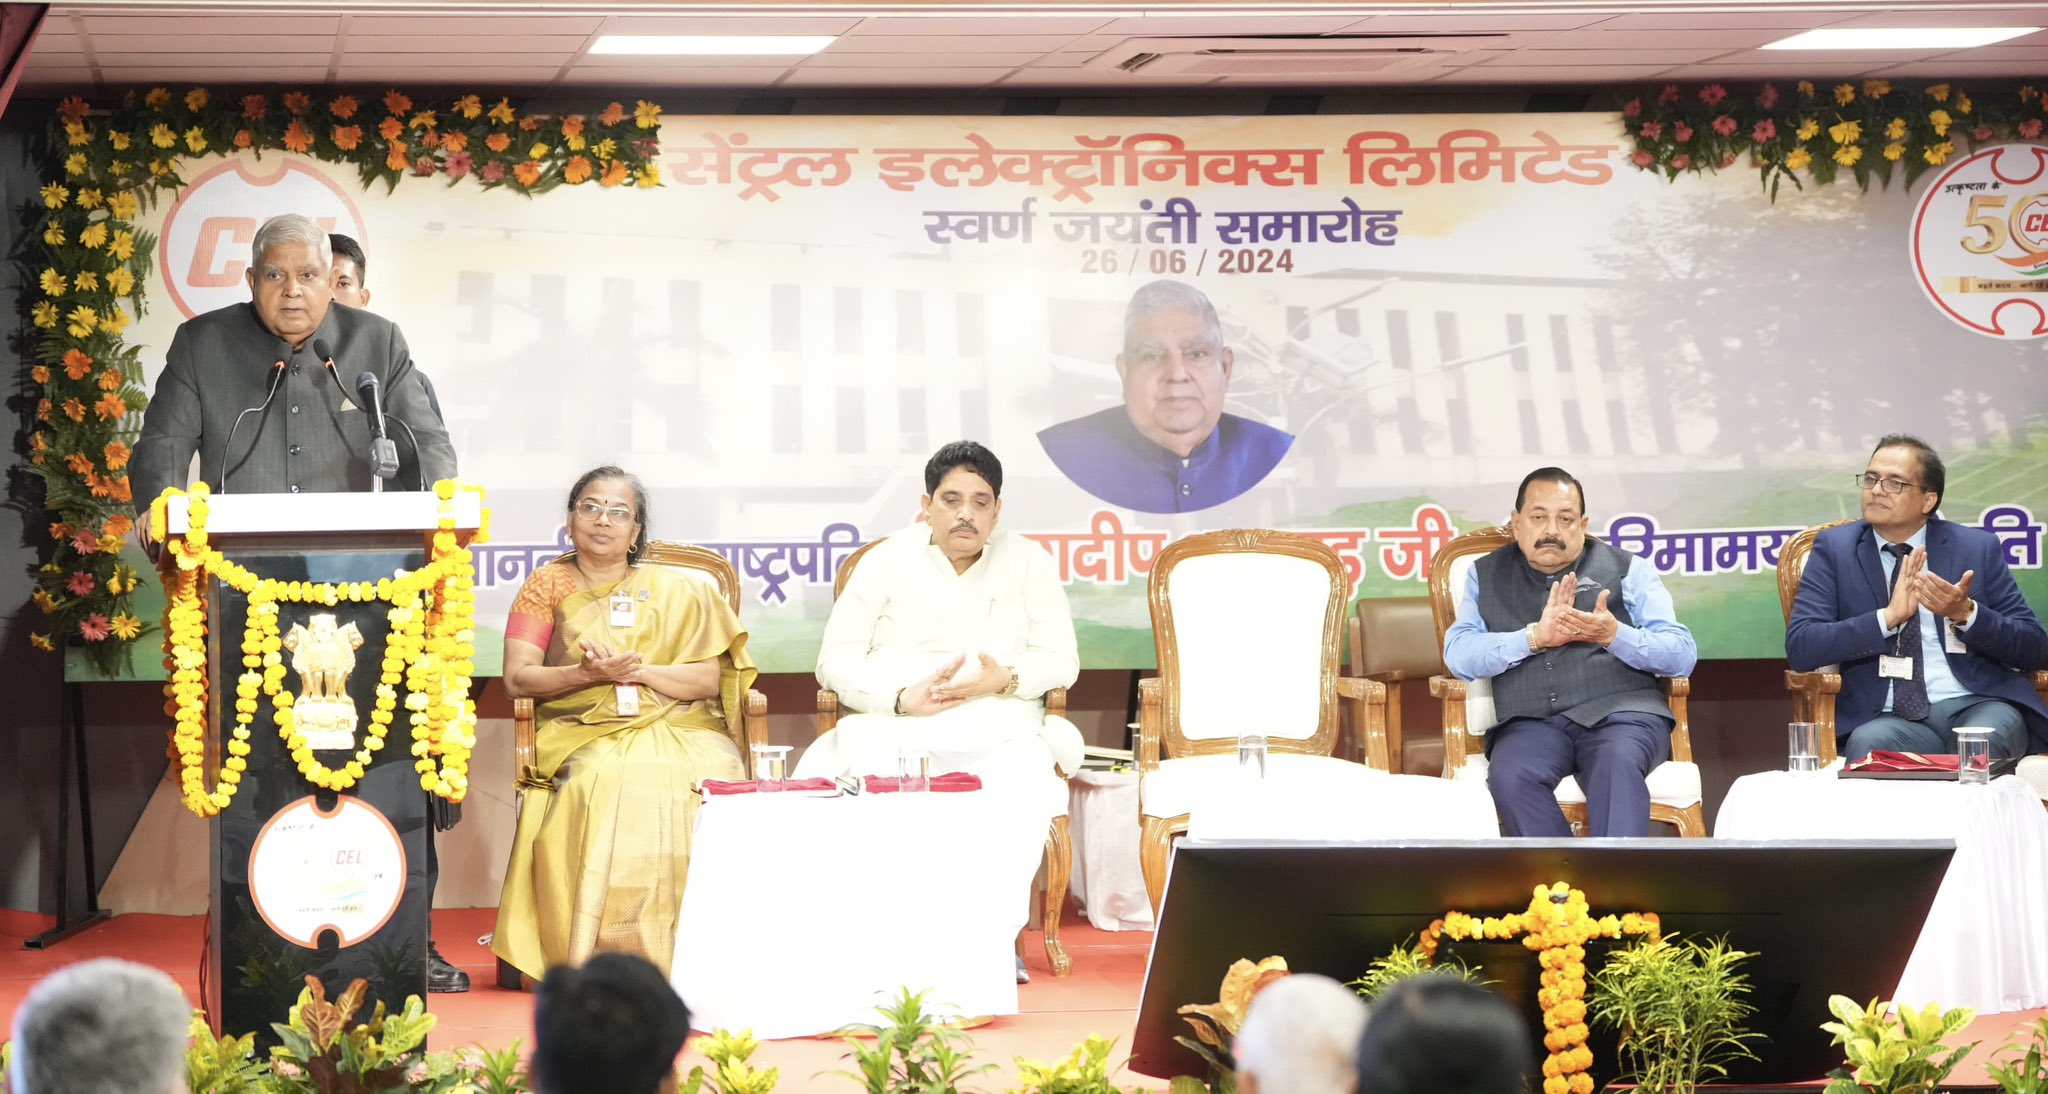 The Vice-President, Shri Jagdeep Dhankhar addressing the gathering at the Golden Jubilee Celebrations of Central Electronics Limited in Ghaziabad, Uttar Pradesh on June 26, 2024.